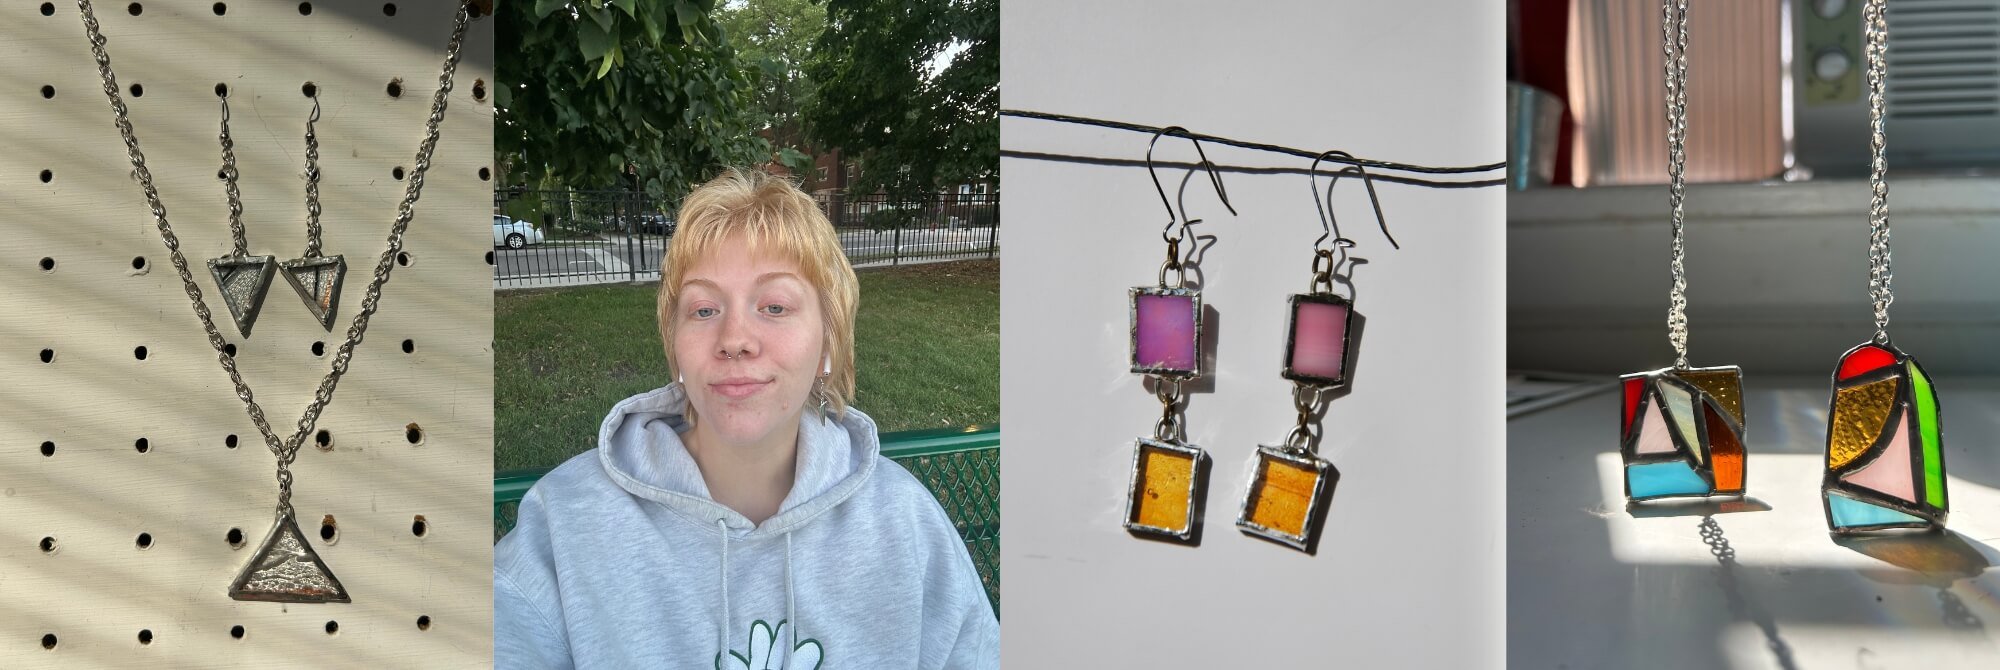 Stained Glass ❤️ Jewelry Workshop - January 31